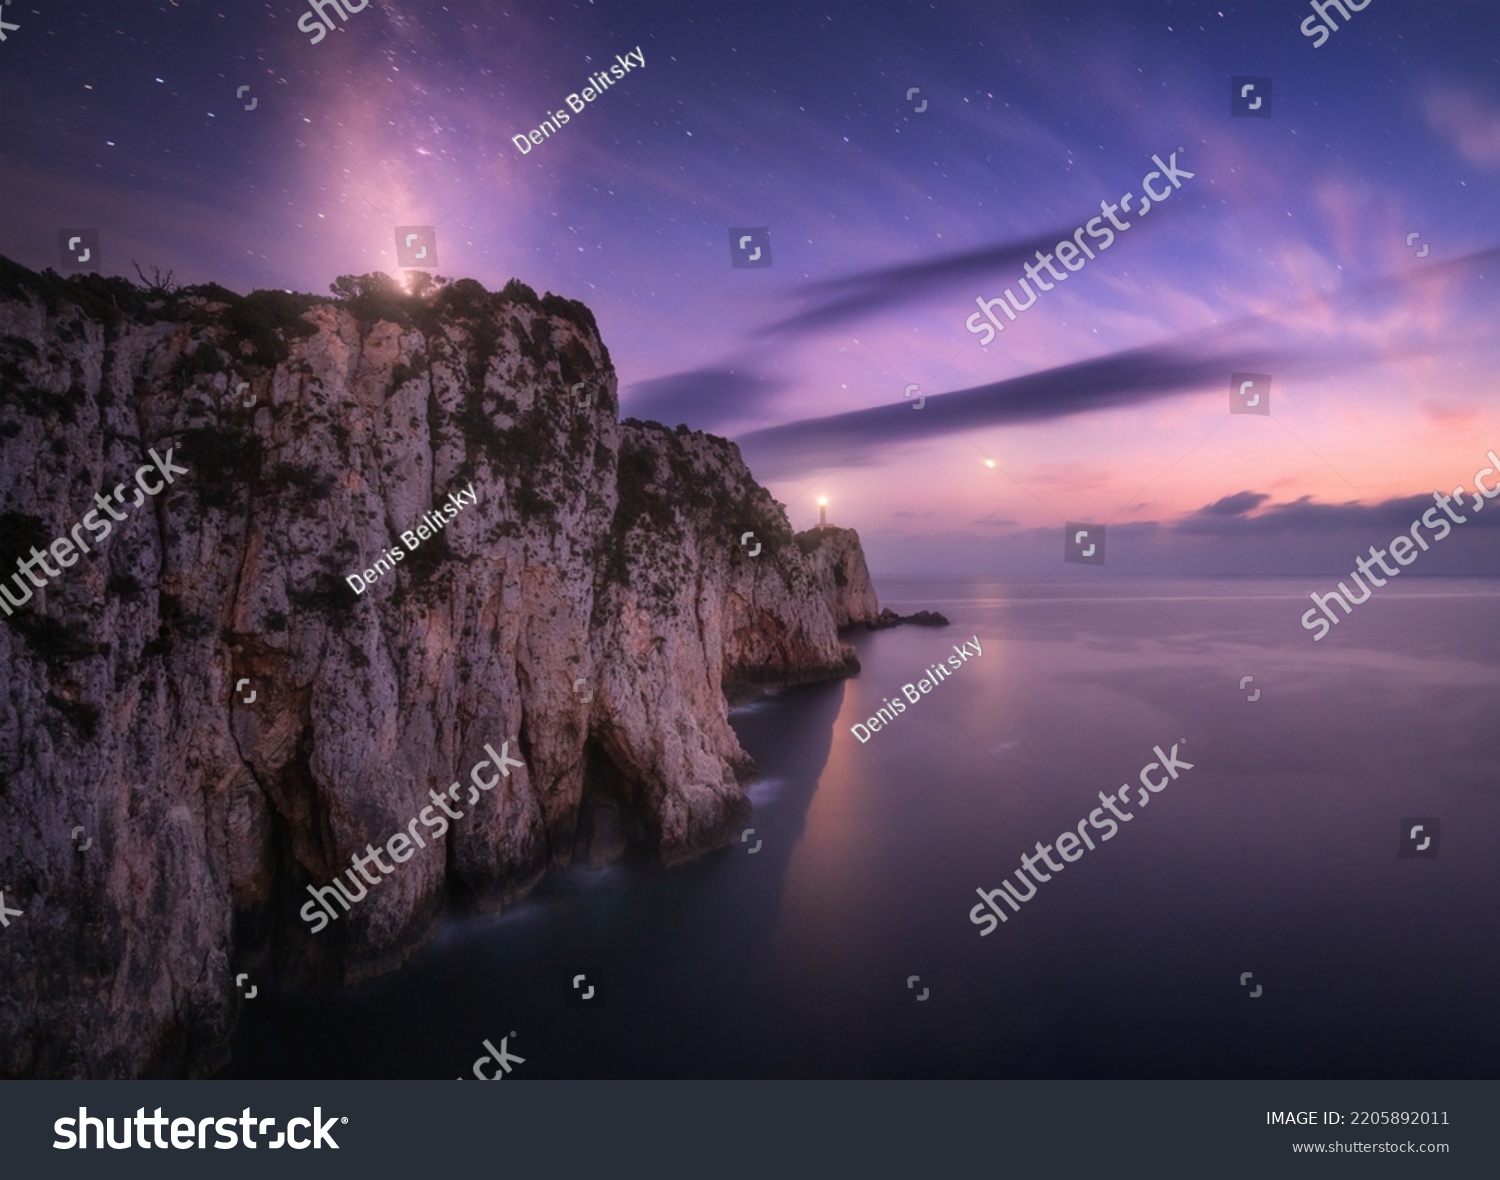 Lighthouse on the mountain peak at starry night in summer. Beautiful cliffs, rocky sea coast, bright stars, milky way and violet sky with clouds at dusk. Lighthouse of Cape Lefkada, Greece. Landscape #2205892011